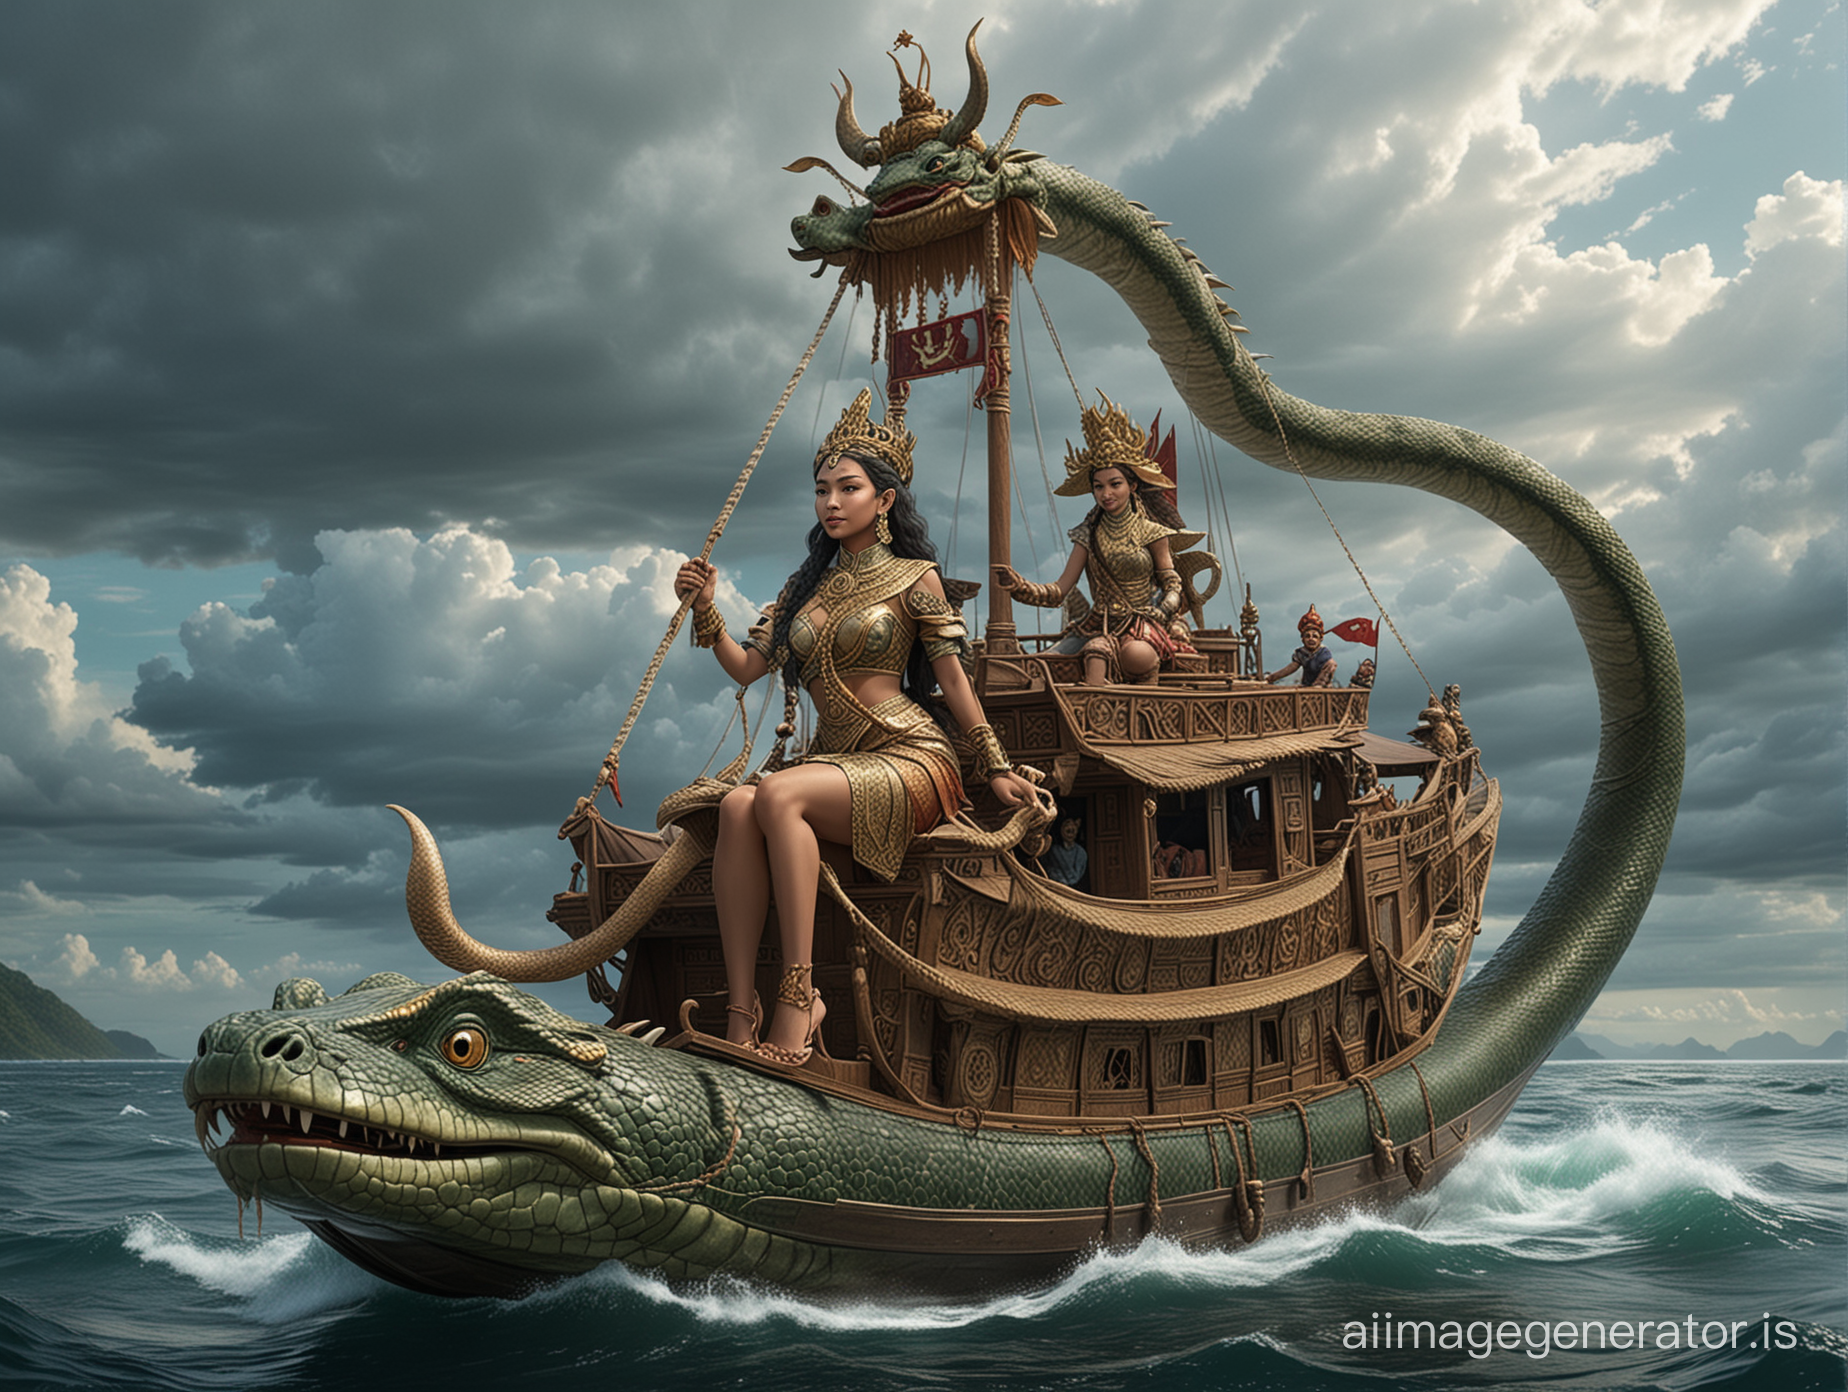 The character of Queen Nyai Roro Kidul Indonesia, in the middle of the beautiful ocean, Queen Nyai Roro Kidol rides a boat, on top of the queen's head is a very large snake